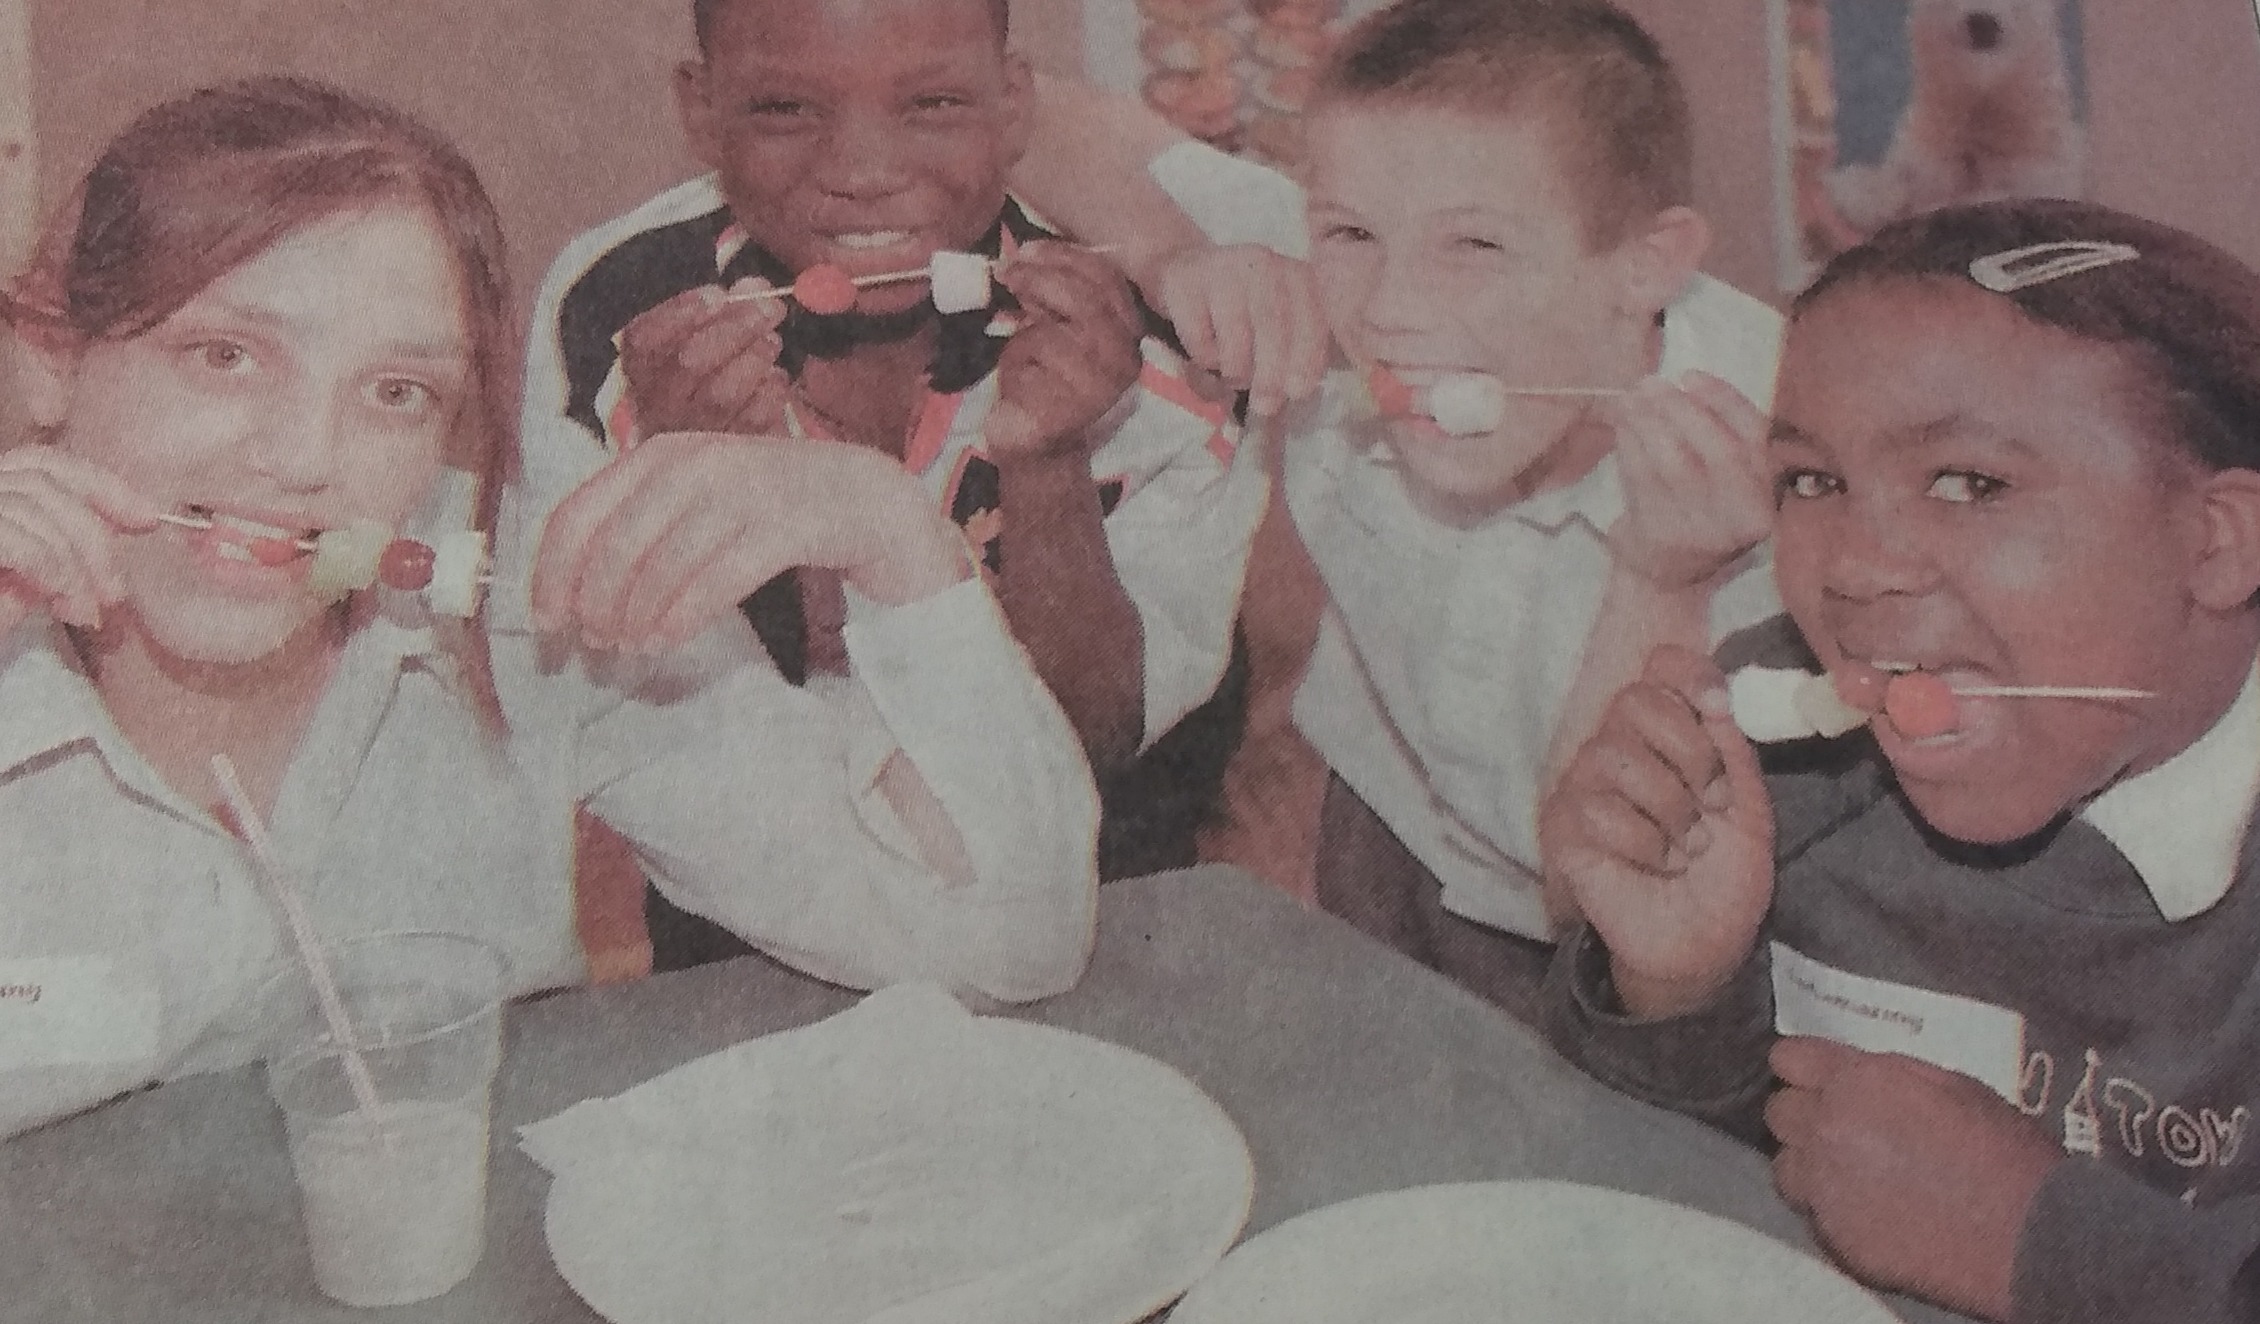 The students enjoying their fruit salad back in 1999